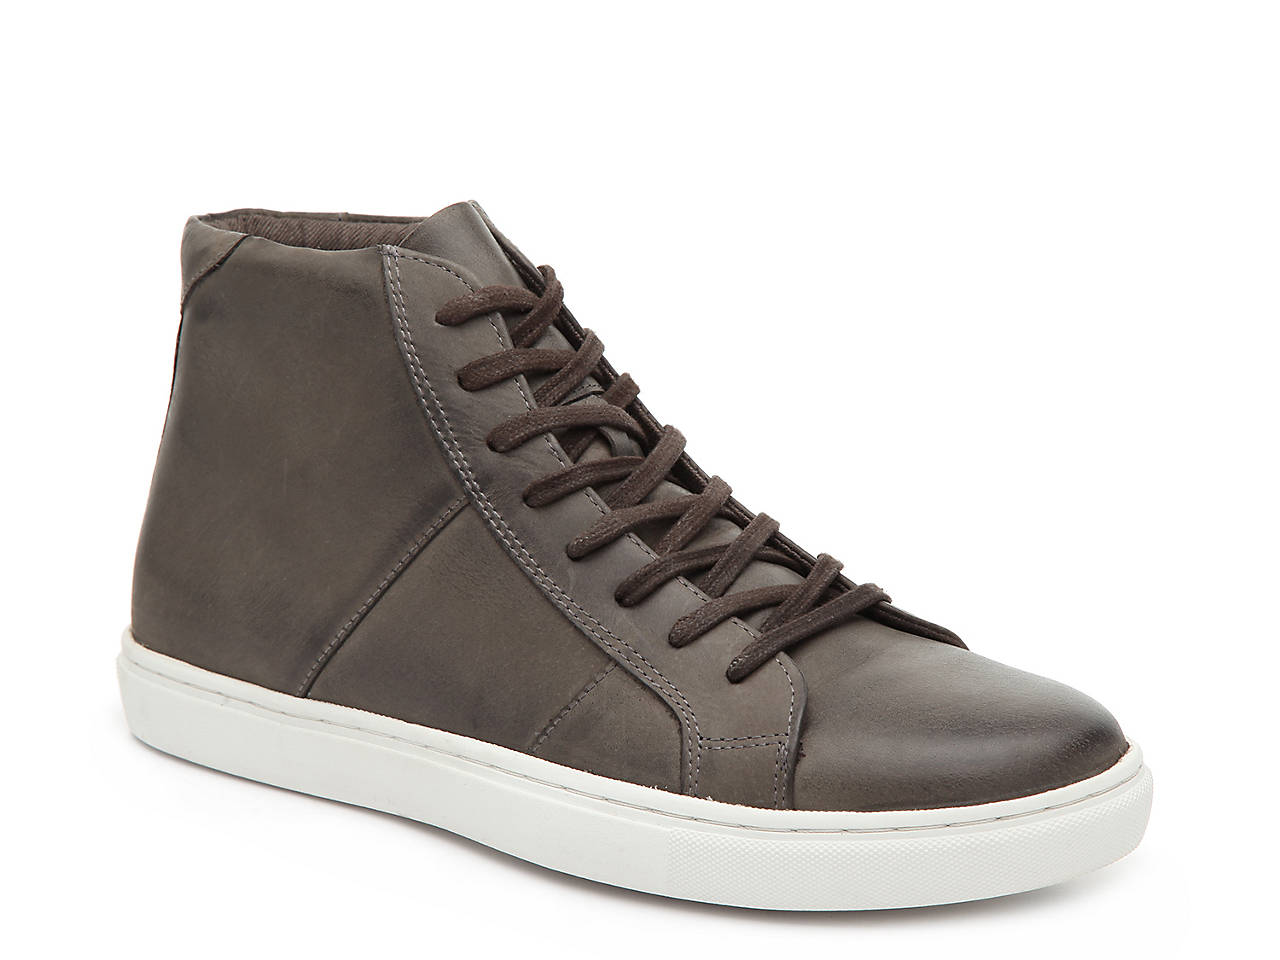 Four Brothers 64850 High-Top Sneaker Men's Shoes | DSW